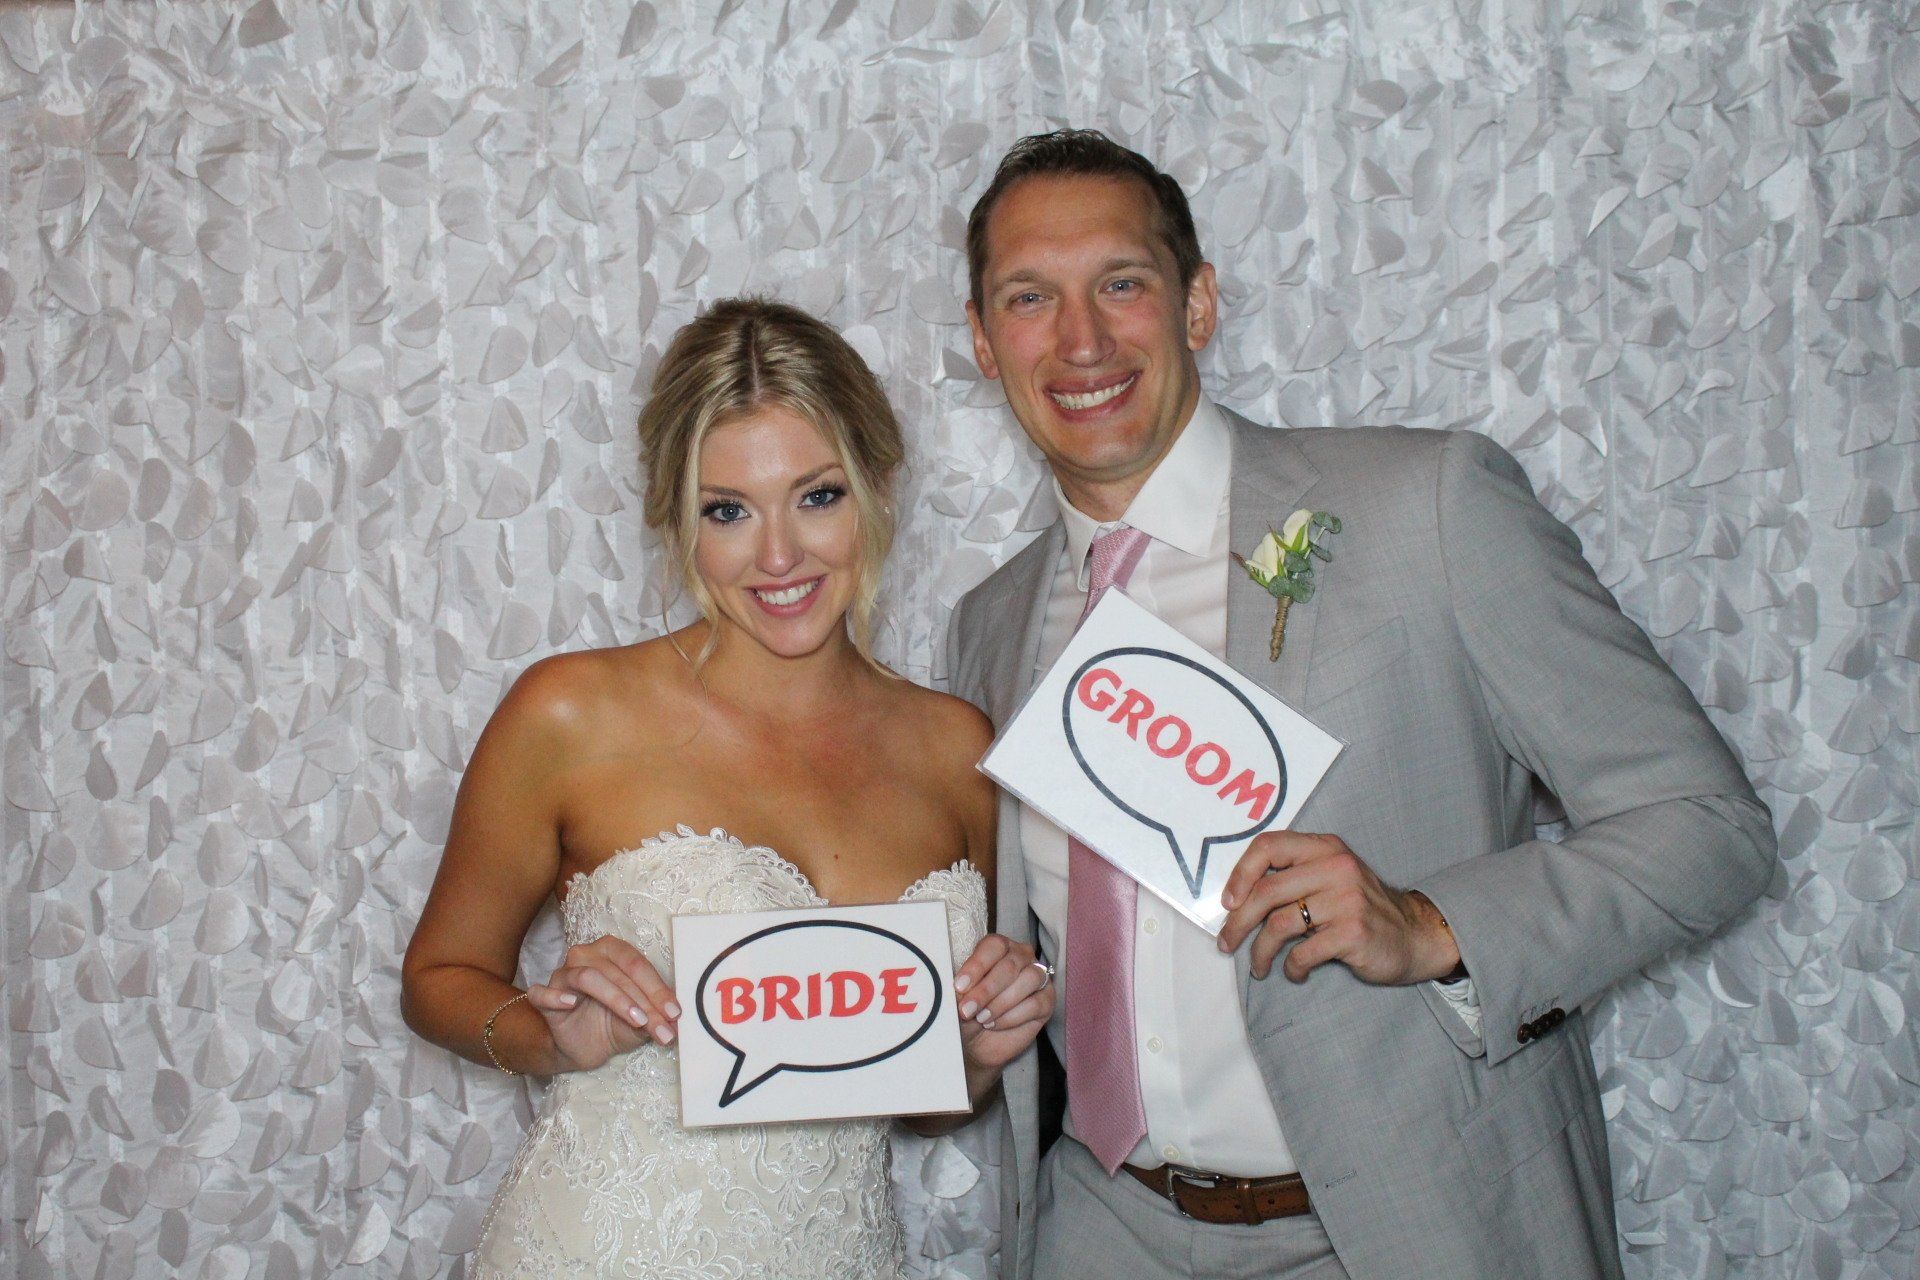 photo booth rental near worcester haverhill andover MA